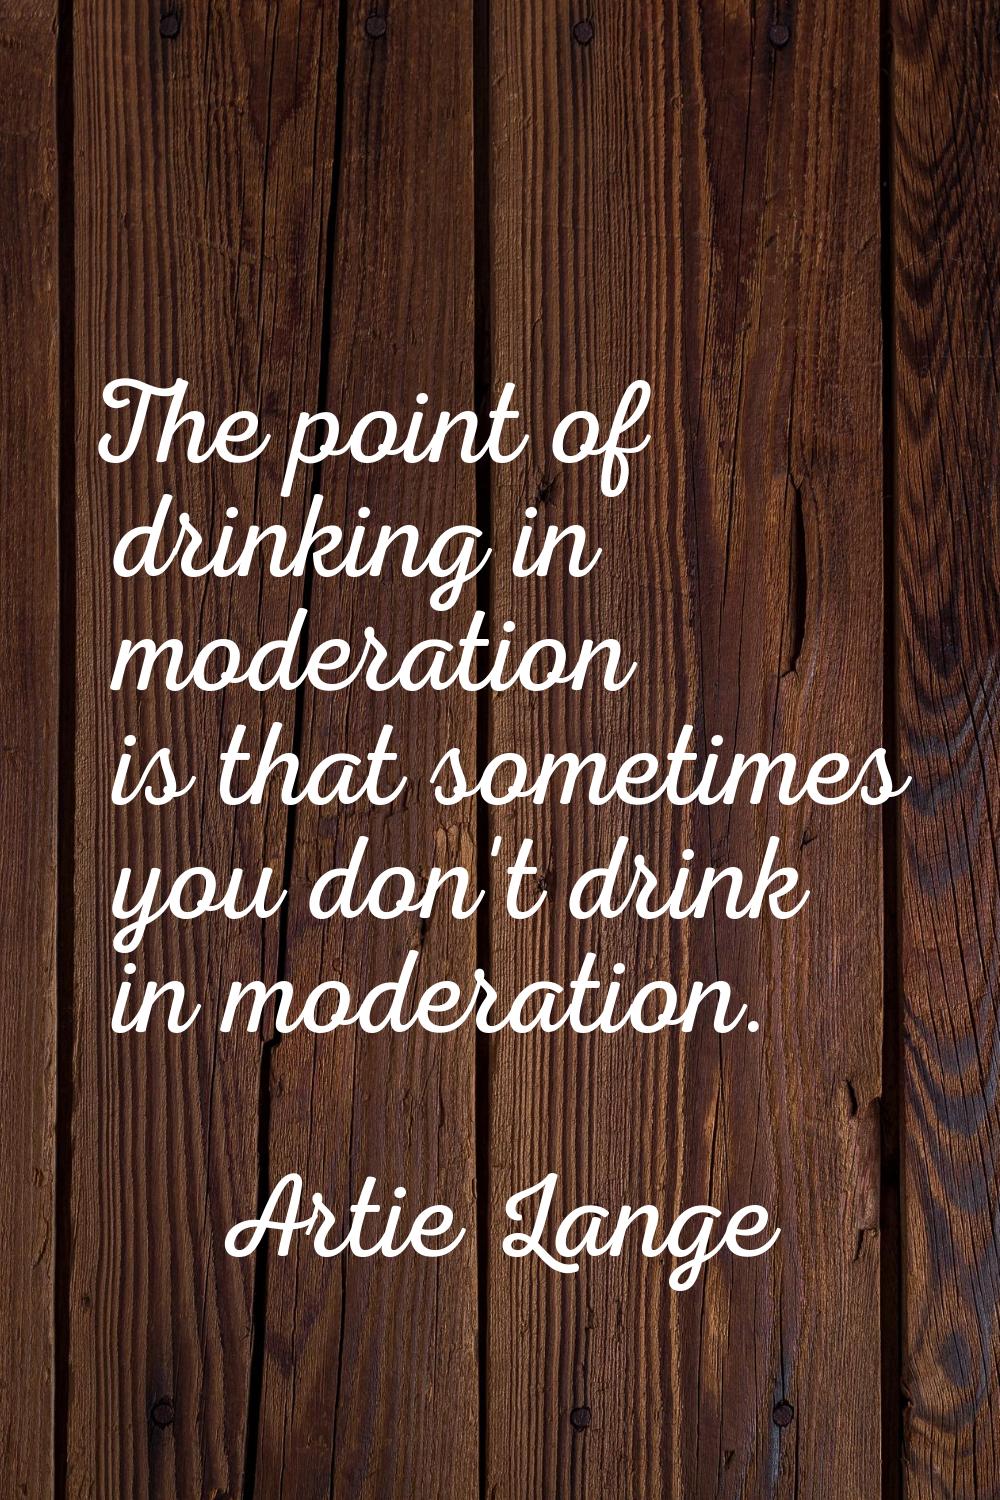 The point of drinking in moderation is that sometimes you don't drink in moderation.